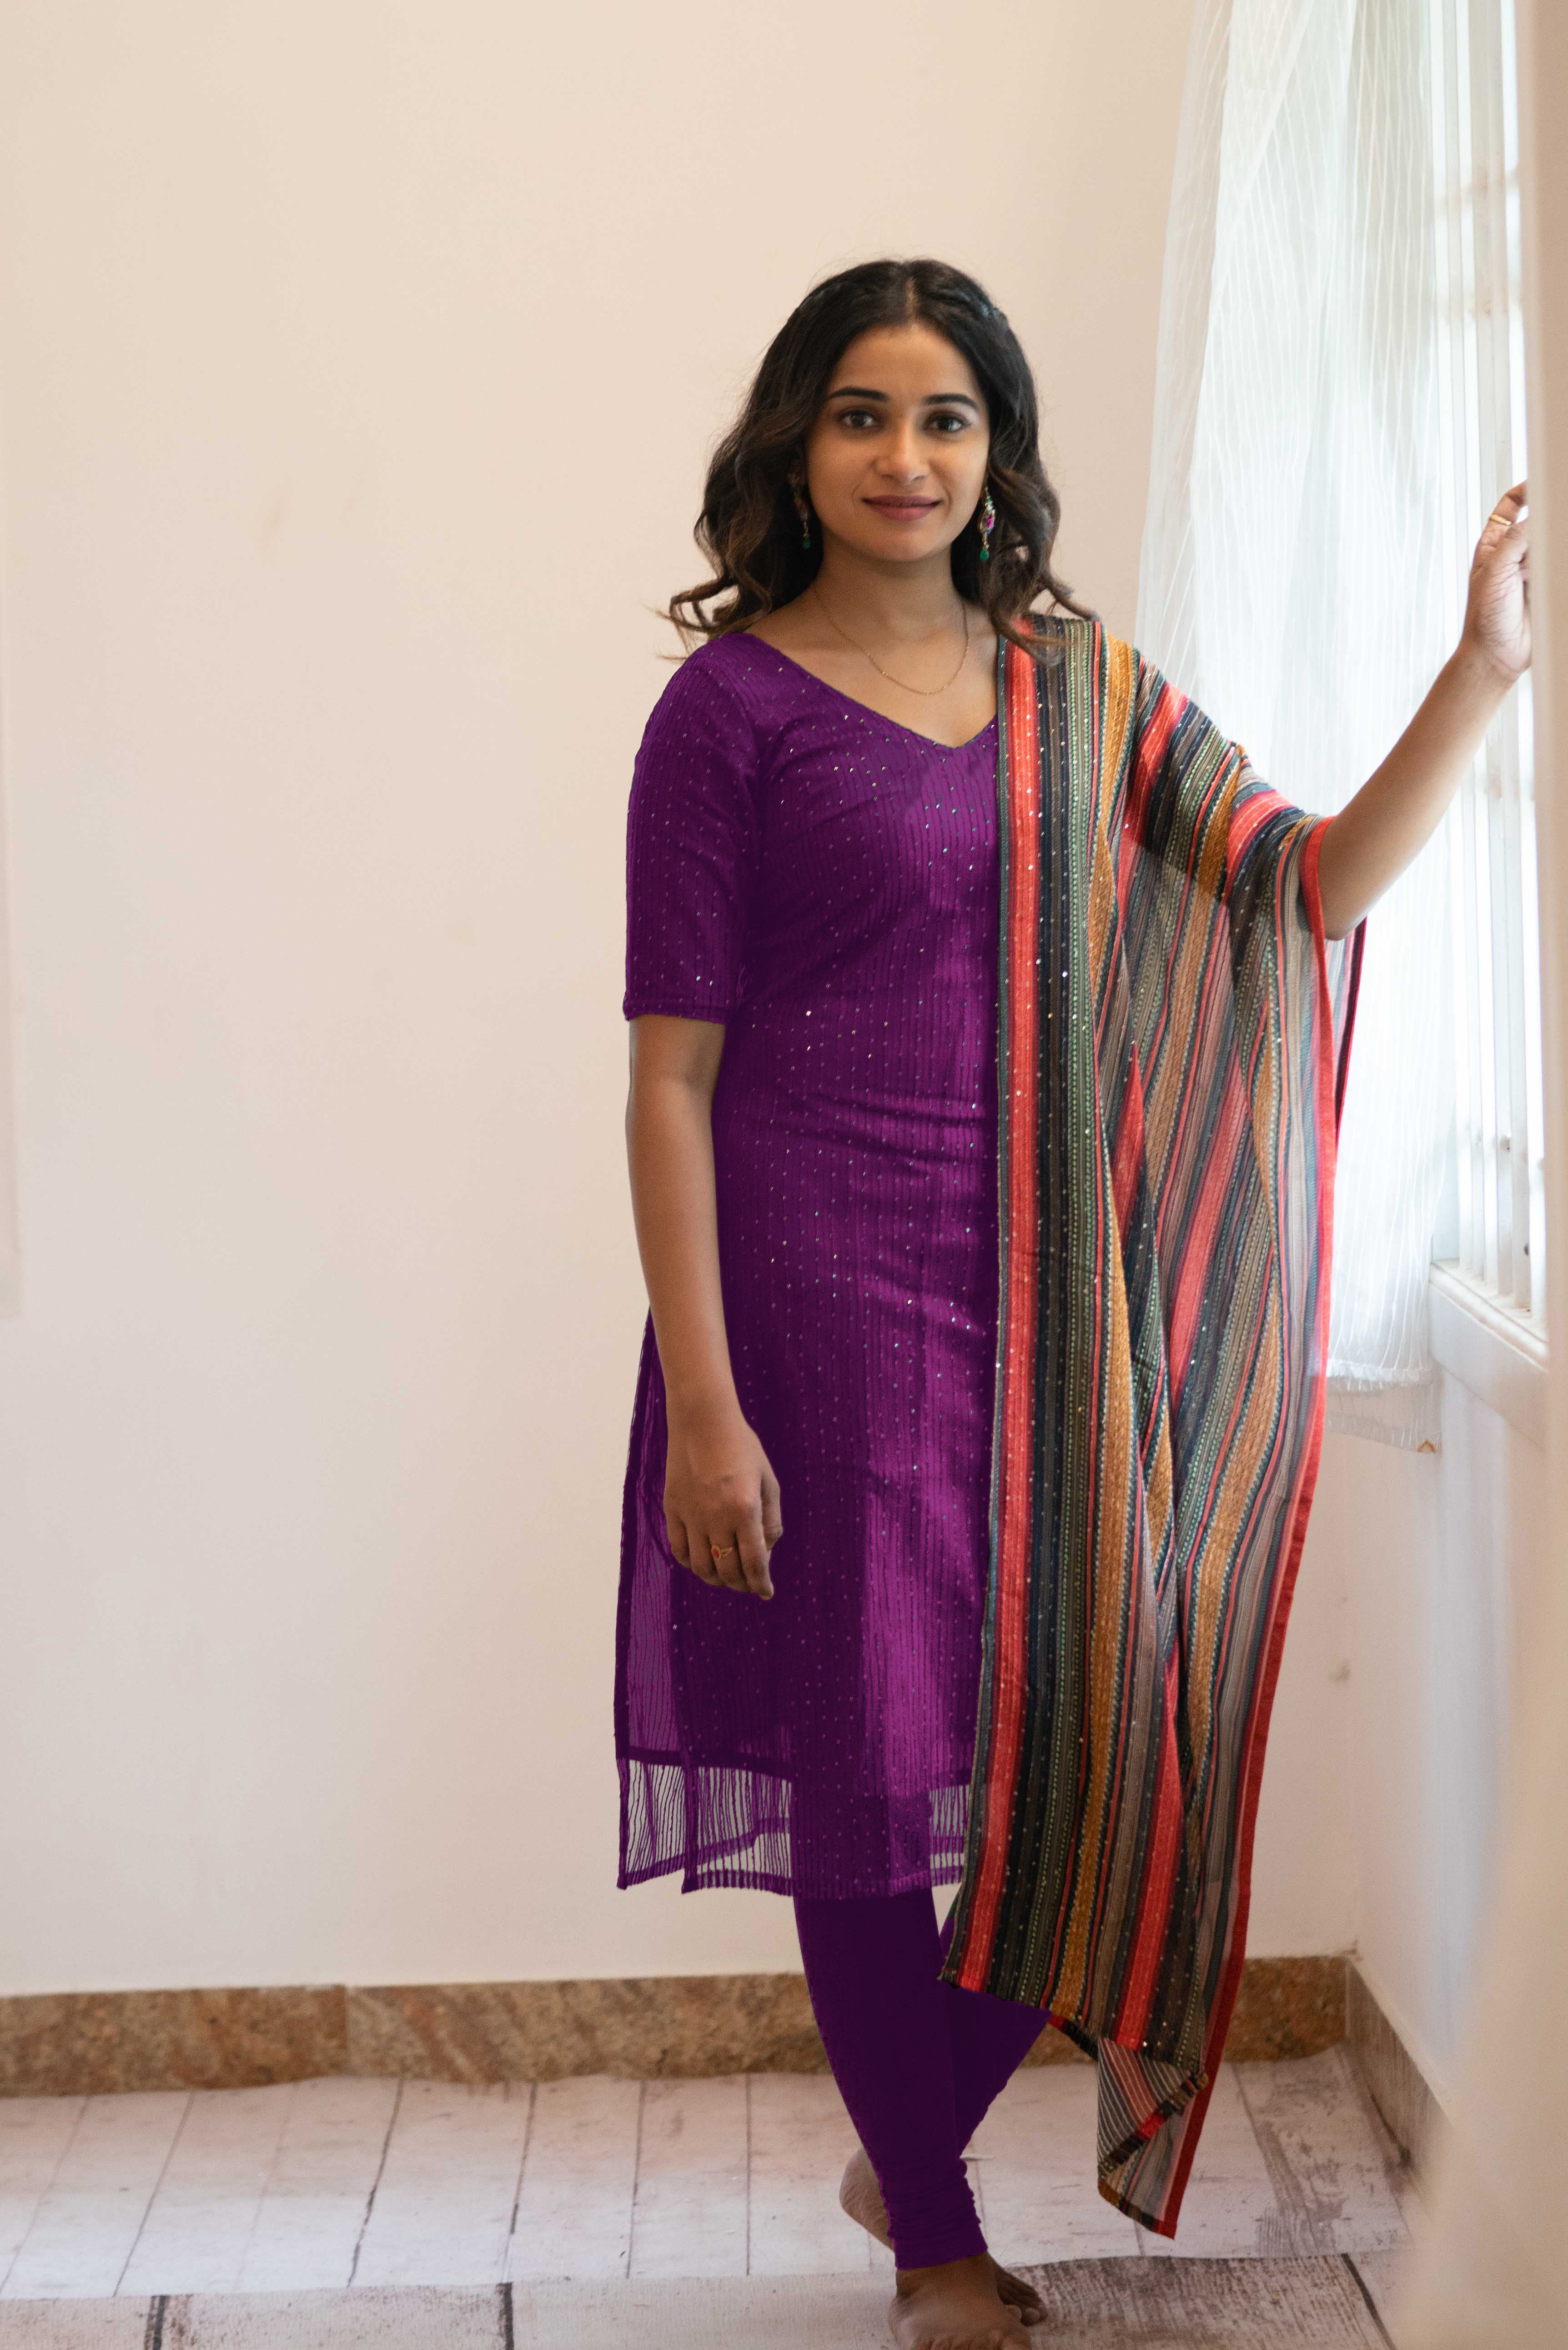 Rust colored viscose Kurti with net sleeves and half body neckline and  collar.